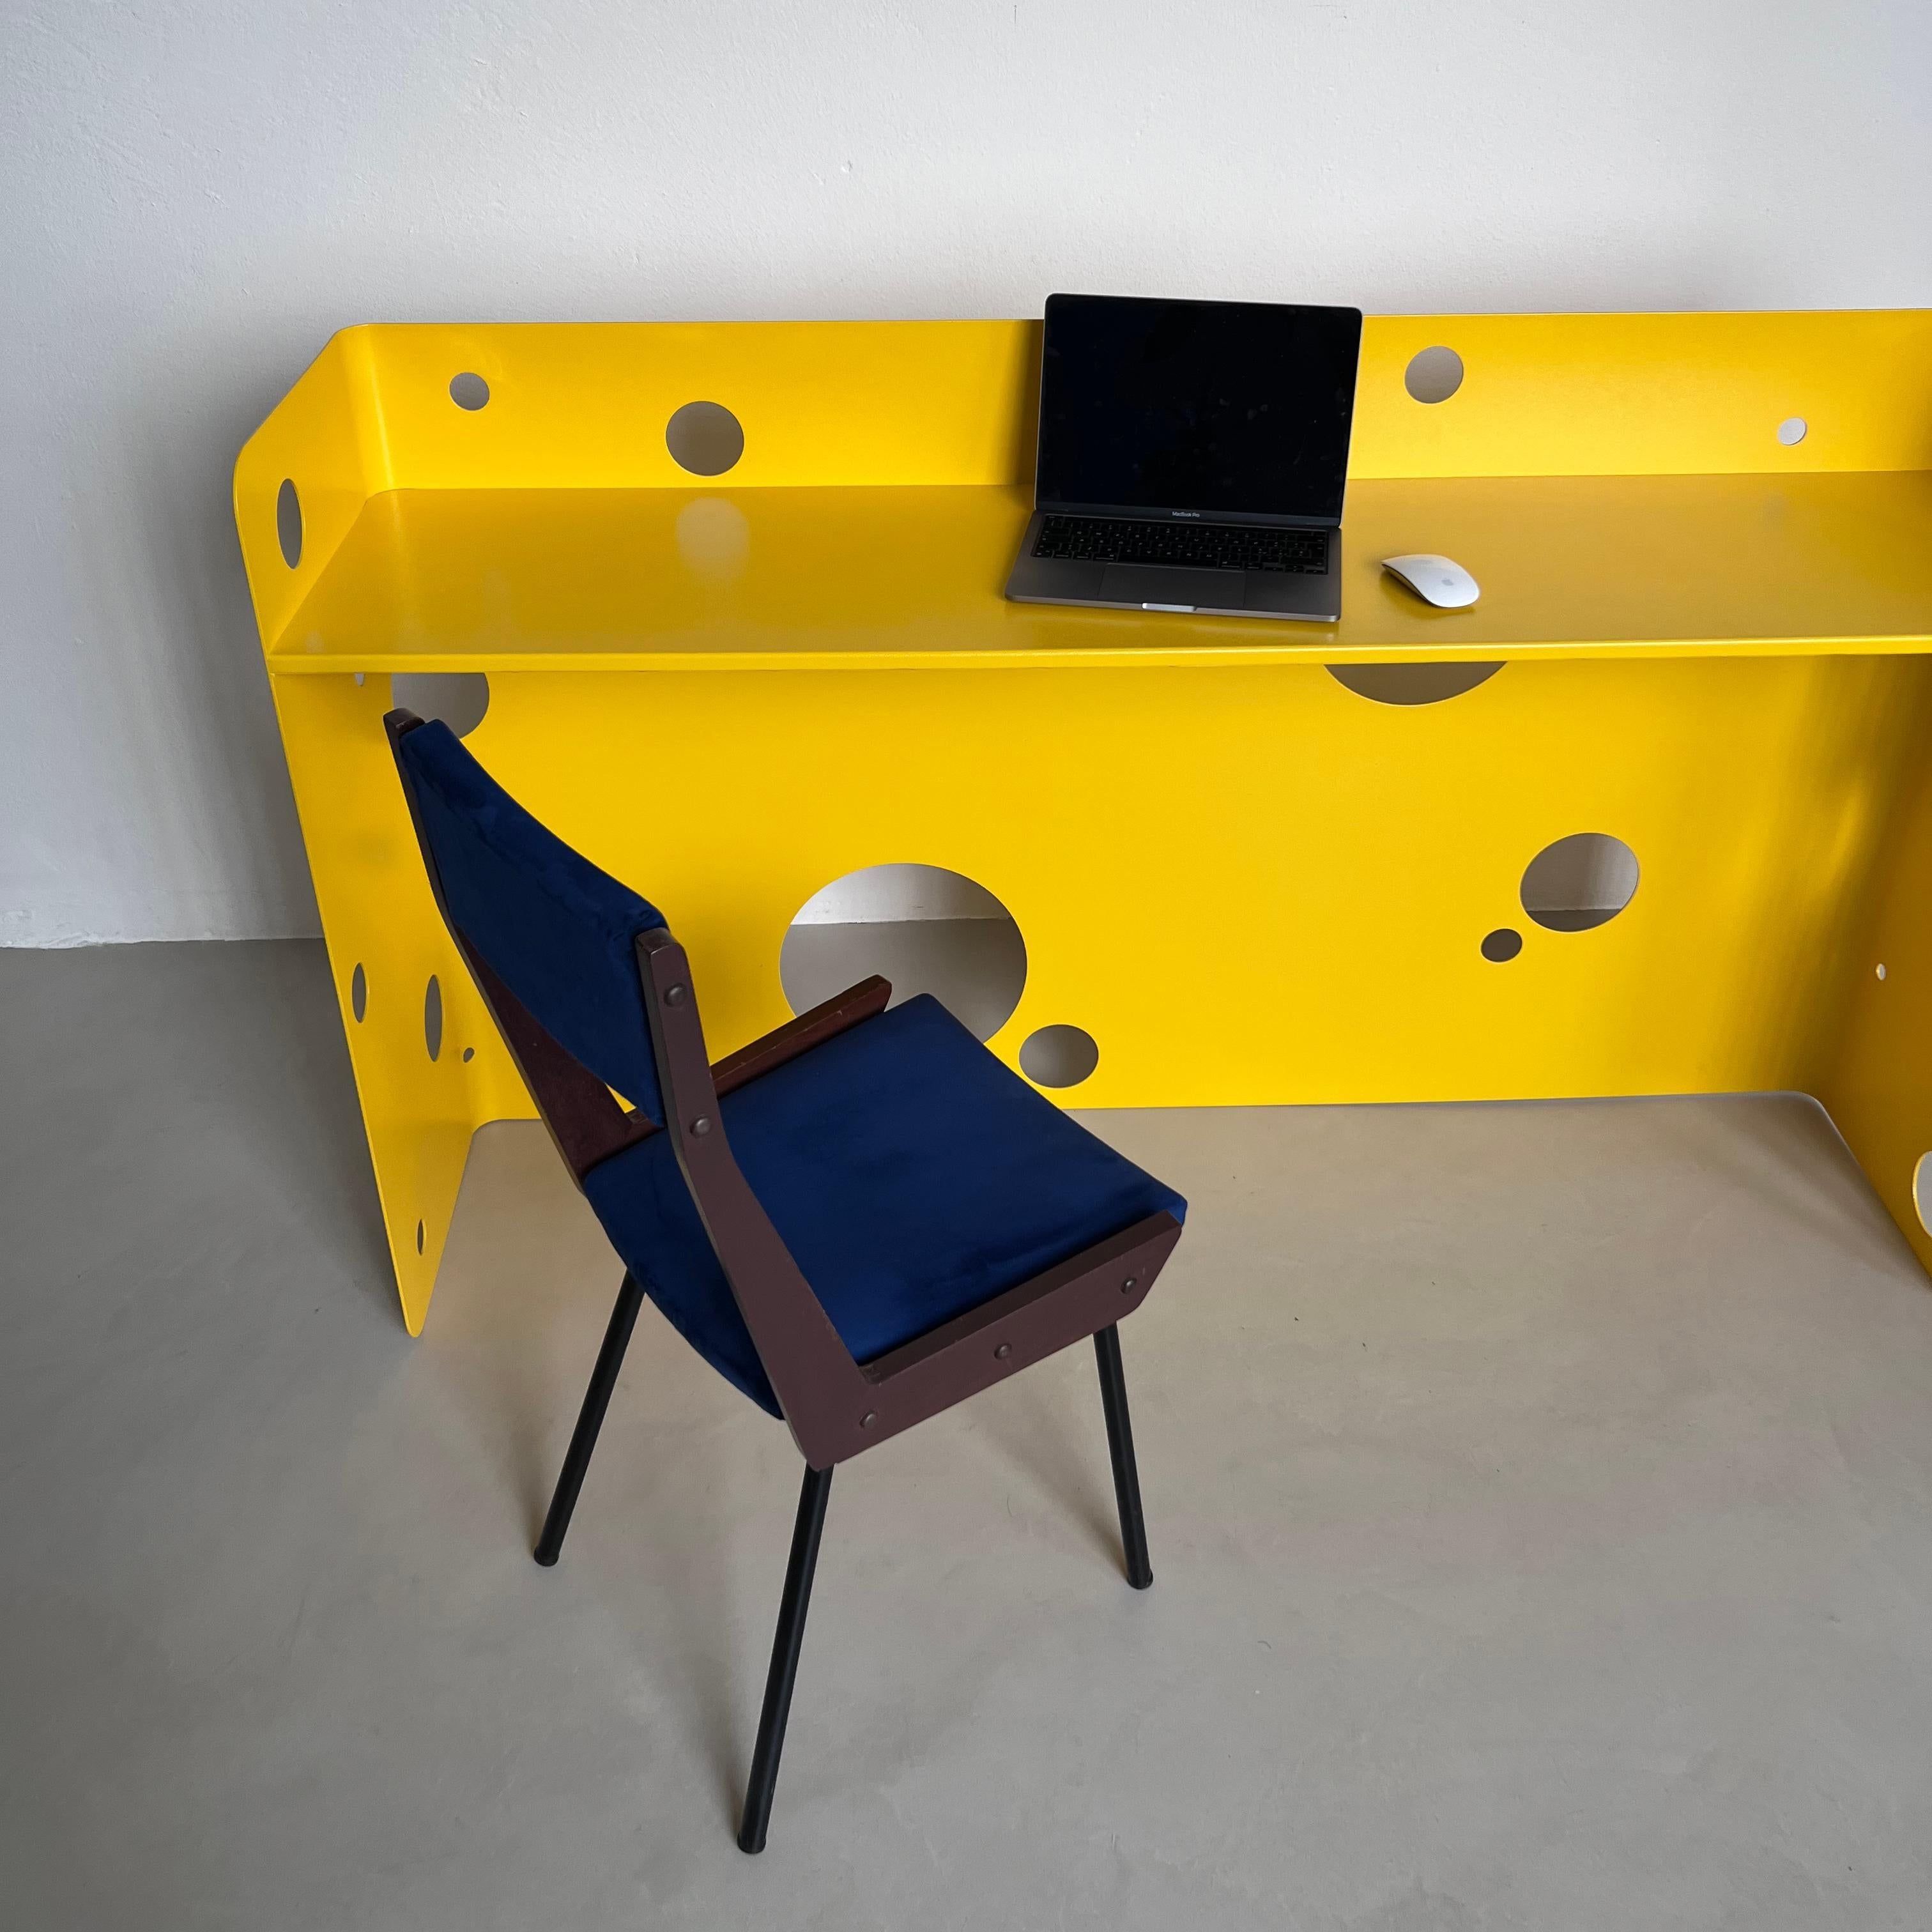 Freestanding Console - Desk, Reception Writing Table in Bright Yellow For Sale 3